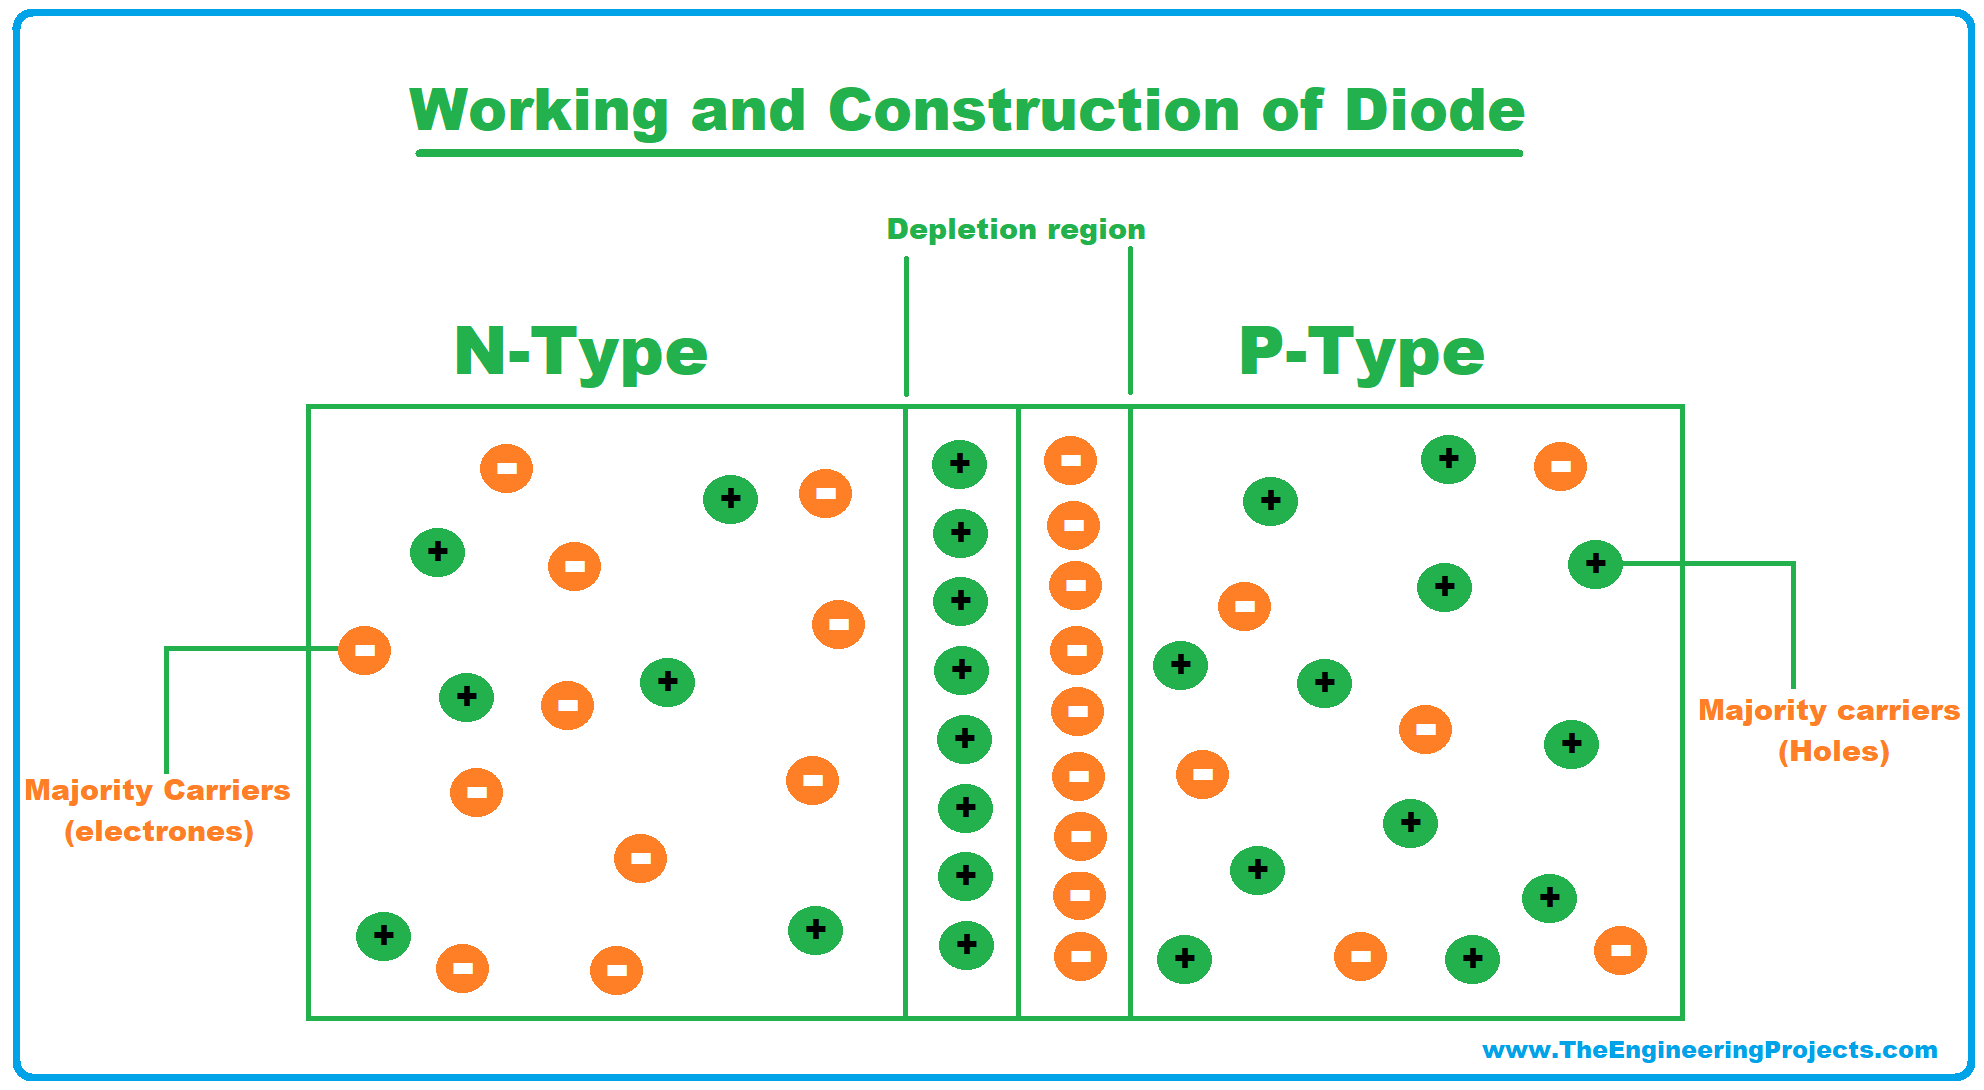 Diode, what is diode, Diode Definition, Diode symbol, Diode working, Diode characteristics, Diode types, Applications of Diodes, electrical symbol of diodes, History of Diode